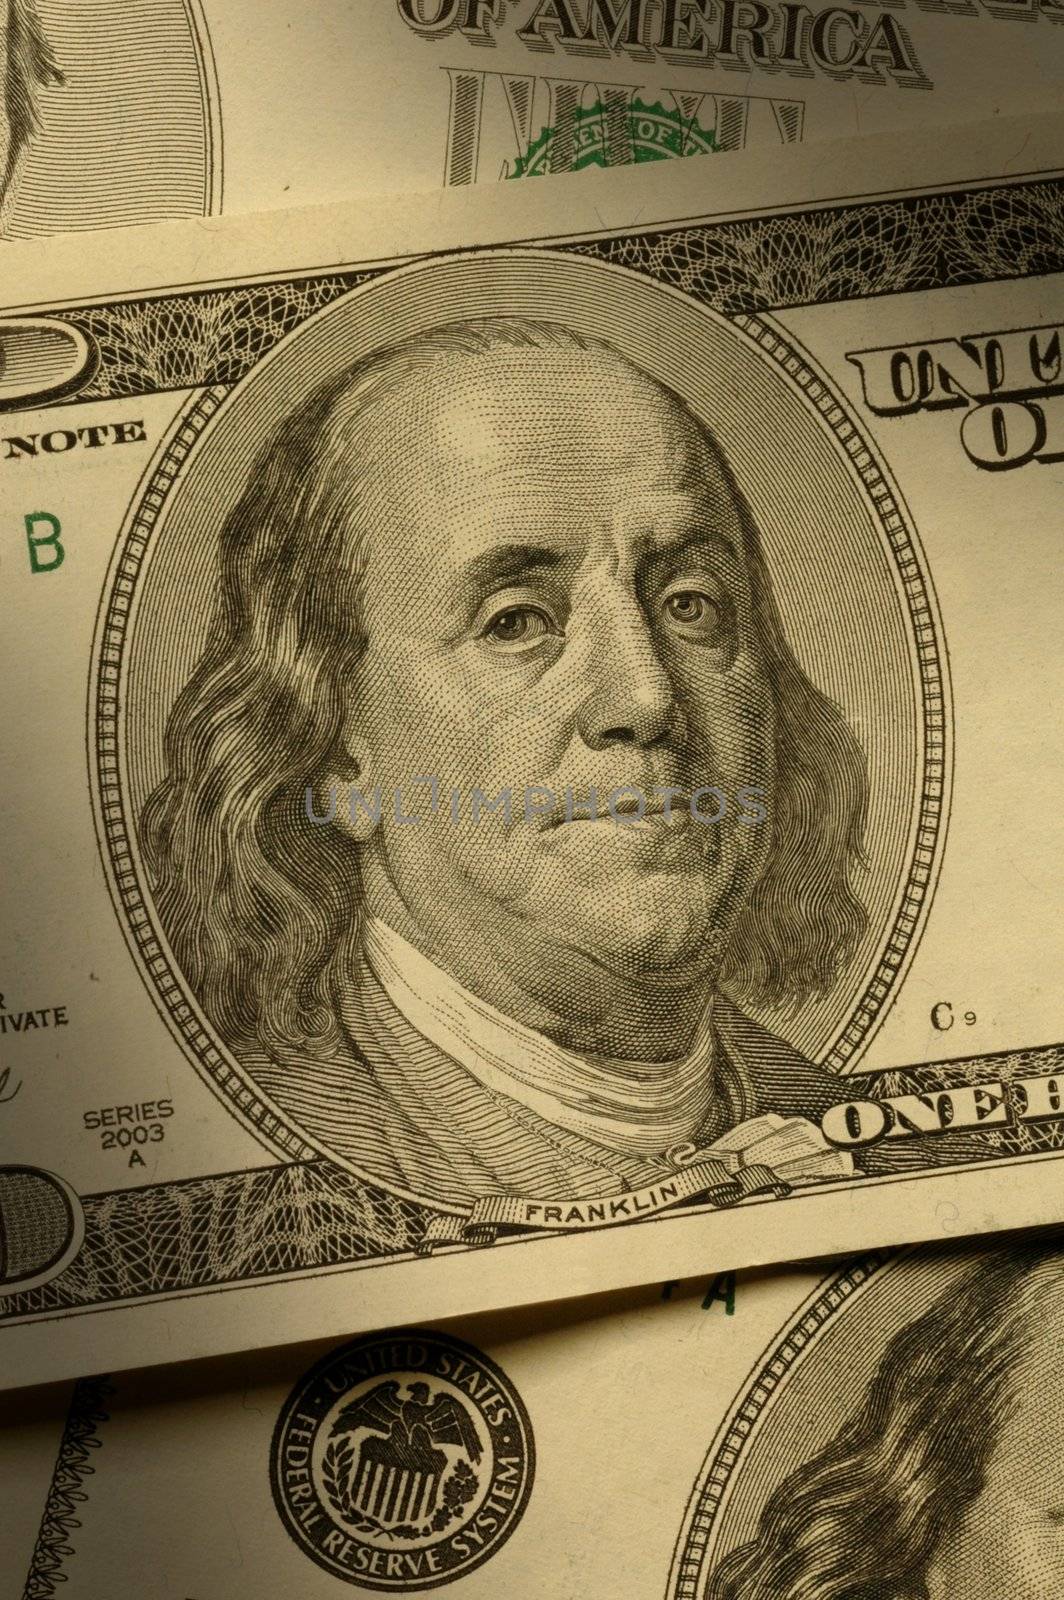 Close-up of Benjamin Franklin on the $100 bill, dramatically lit.